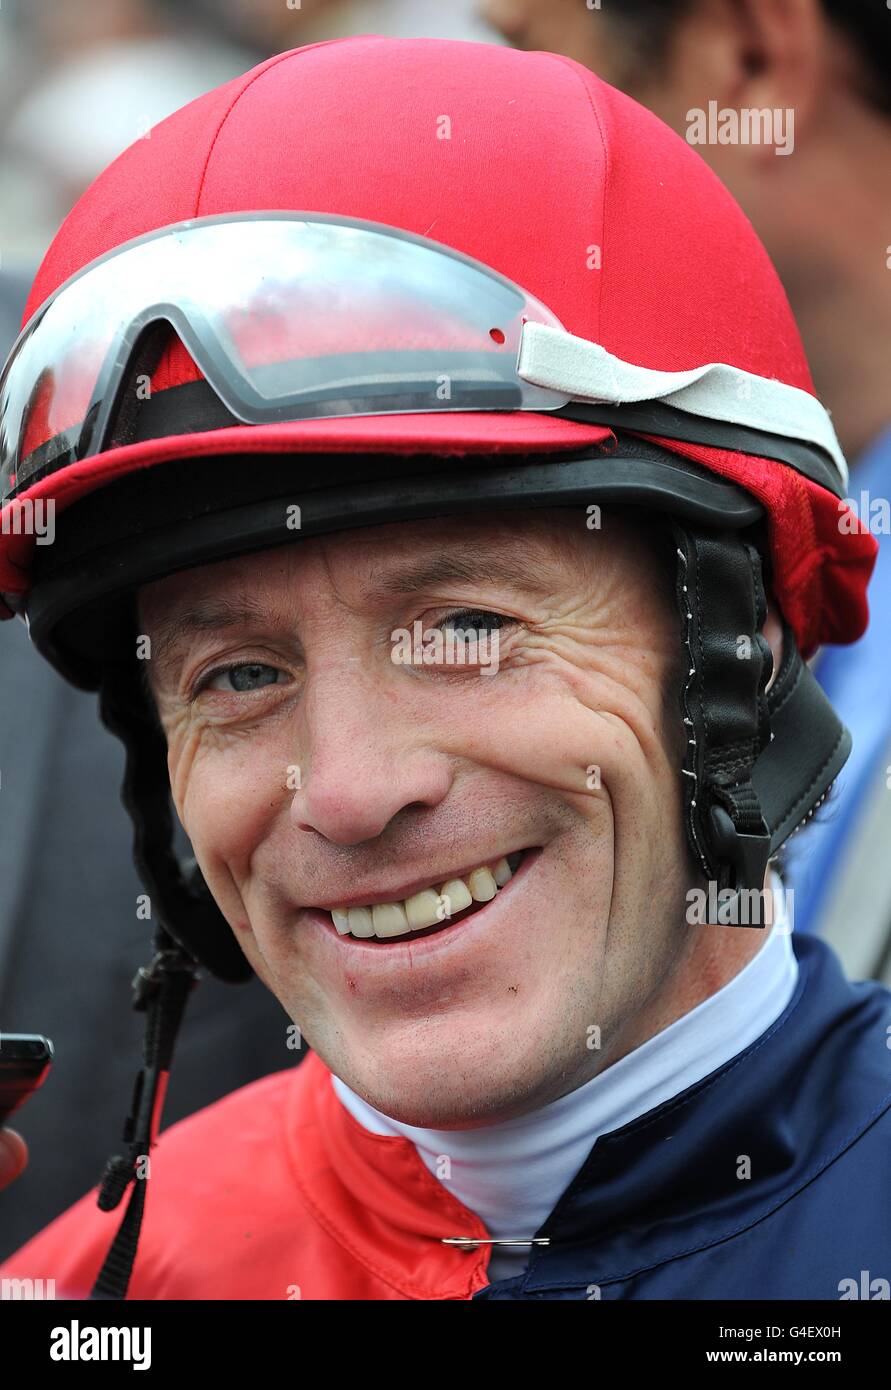 Horse Racing - 2011 Glorious Goodwood Festival - Glorious Totesport Mile Day - Goodwood Racecourse. Jockey Kieren Fallon after winning the Coutts Glorious Stakes on Drunken Sailor Stock Photo